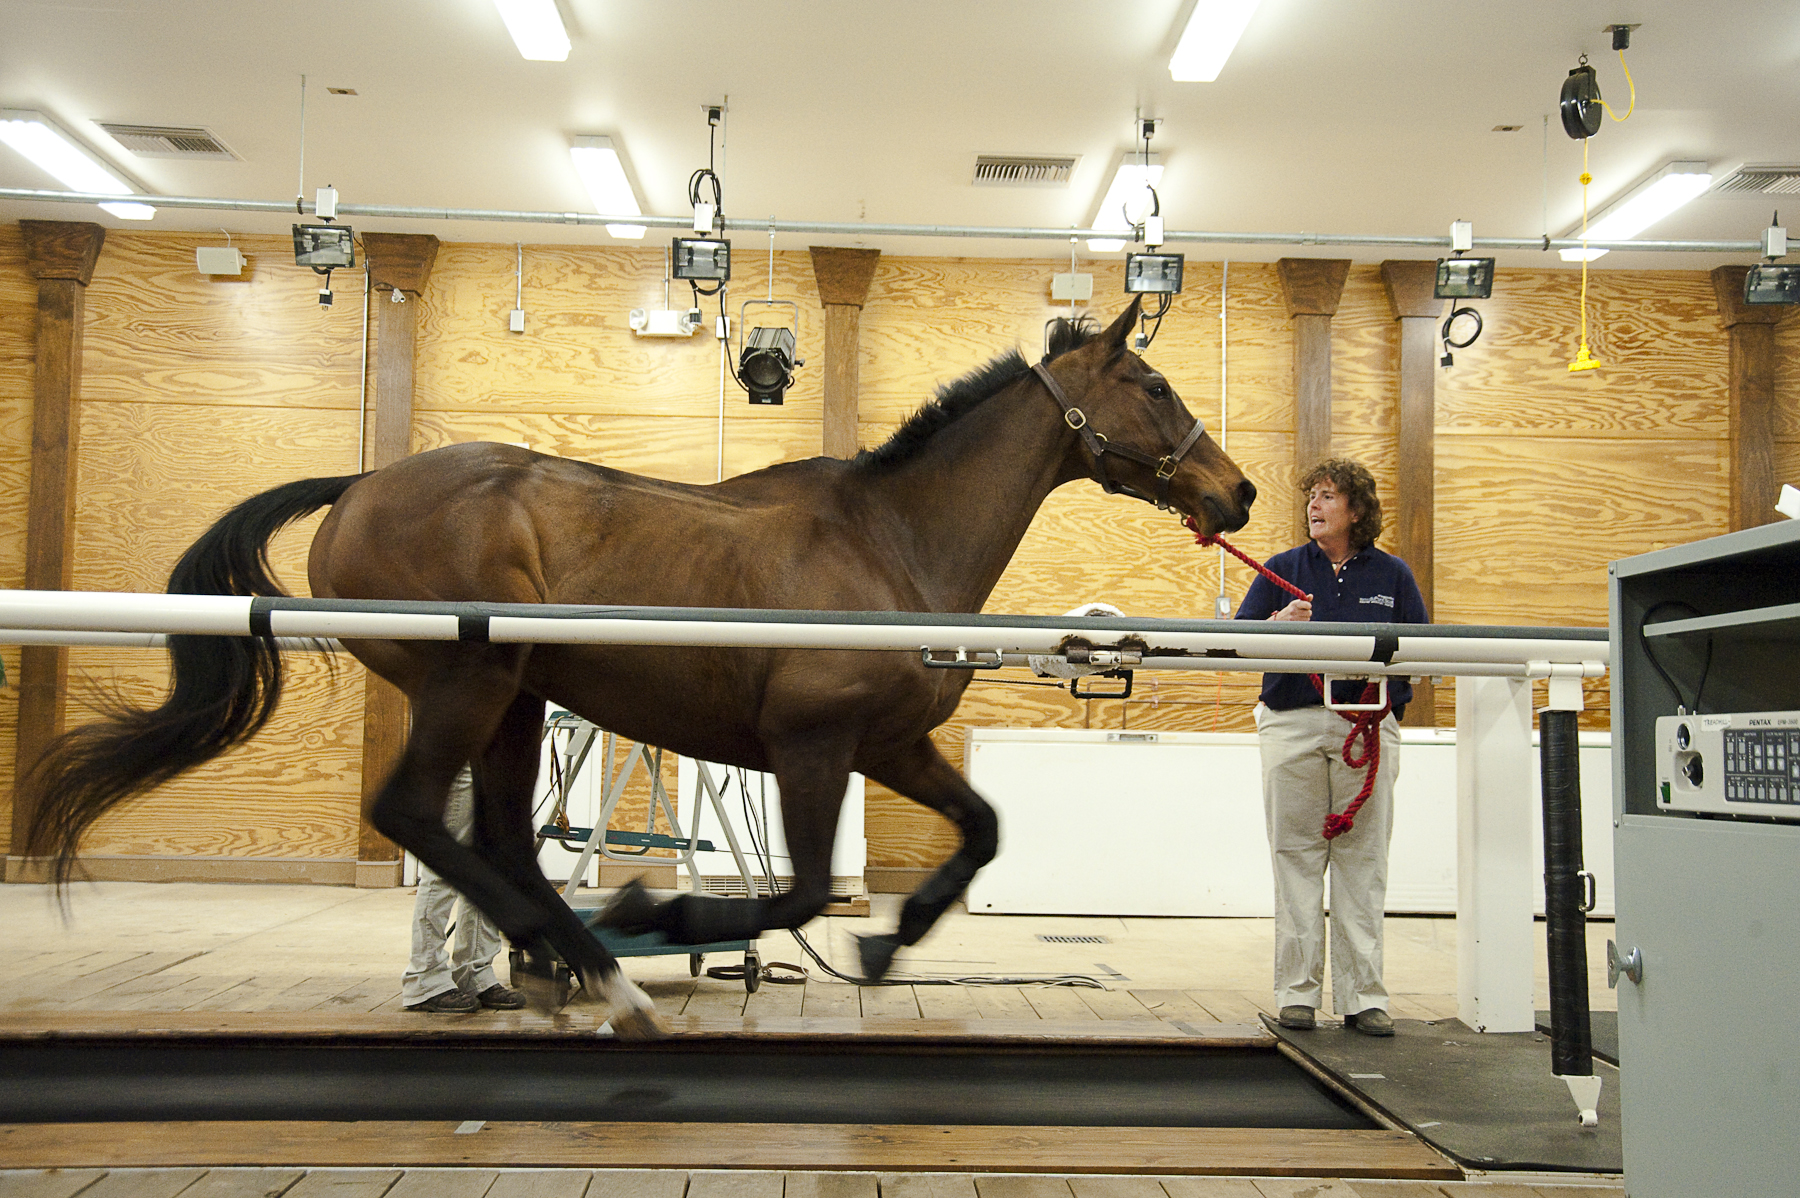 Demonstrations scheduled for the June 13 open house at the Marion duPont Scott Equine Medical Center include showing how horses are diagnosed for possible respiratory or cardiac problems by having them run on the center's high-speed treadmill.